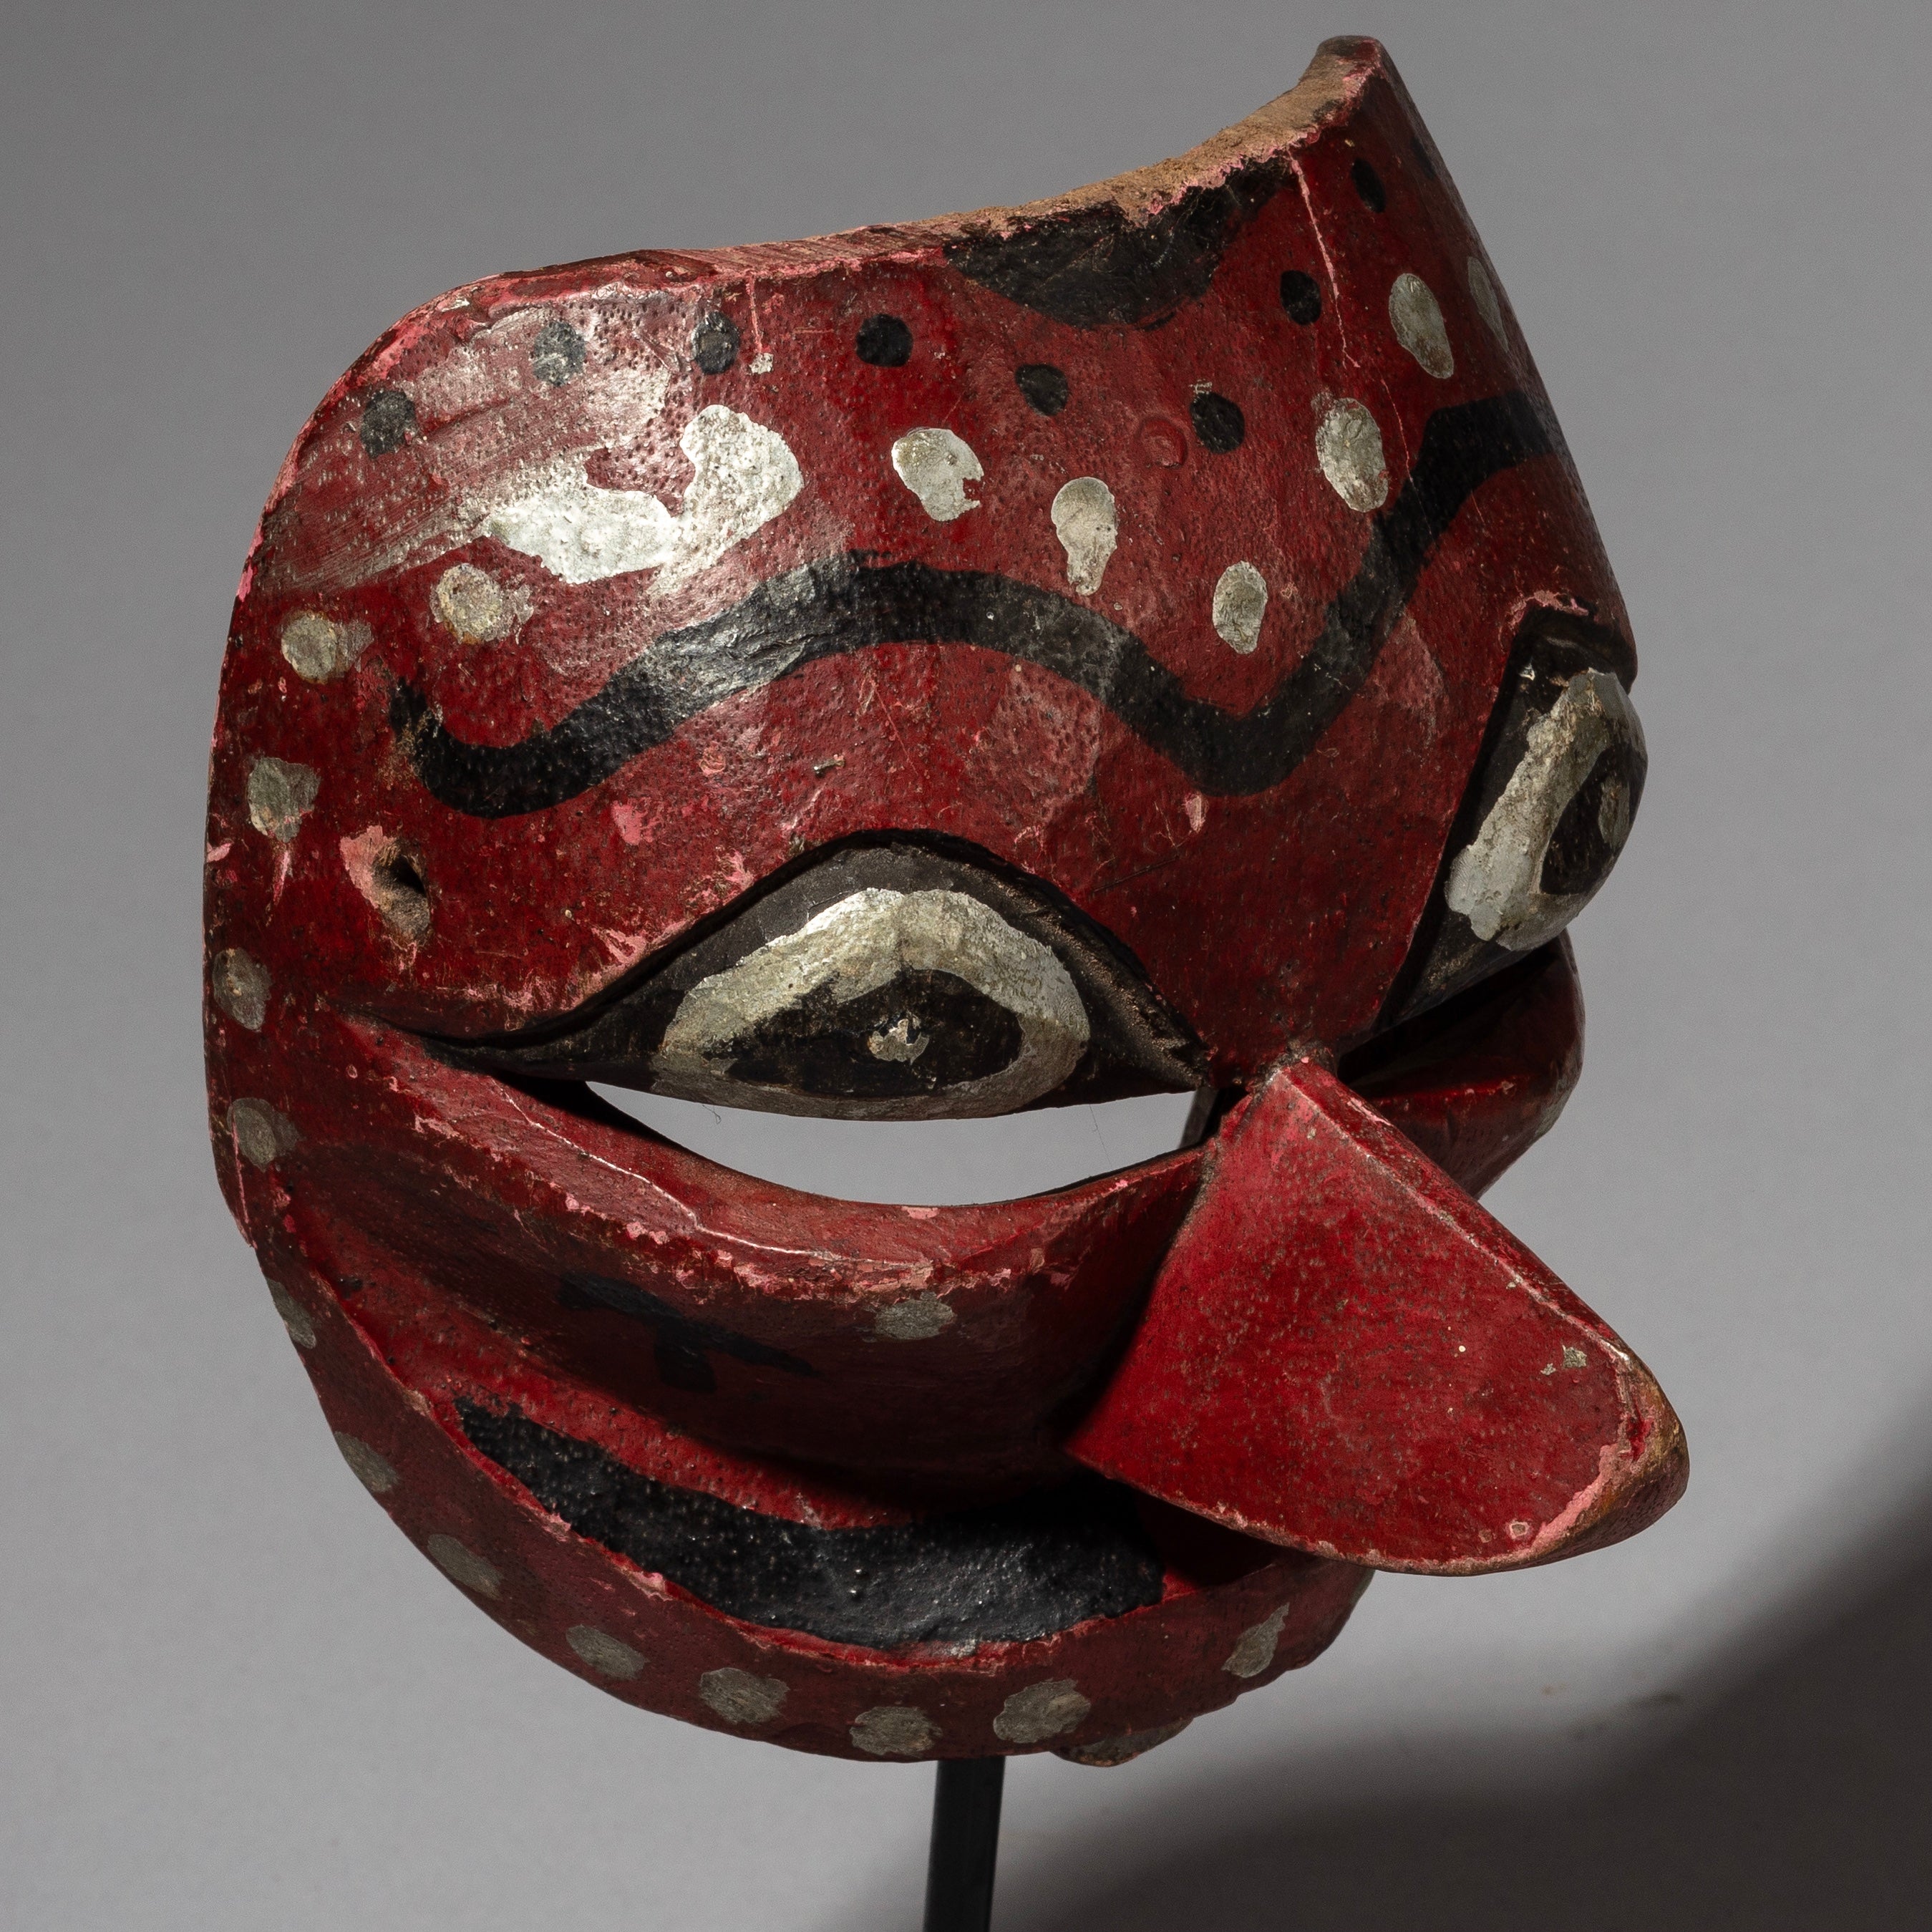 A TRADITIONAL RED JAVANESE TOPENG MASK FROM INDONESIA( No 1922)